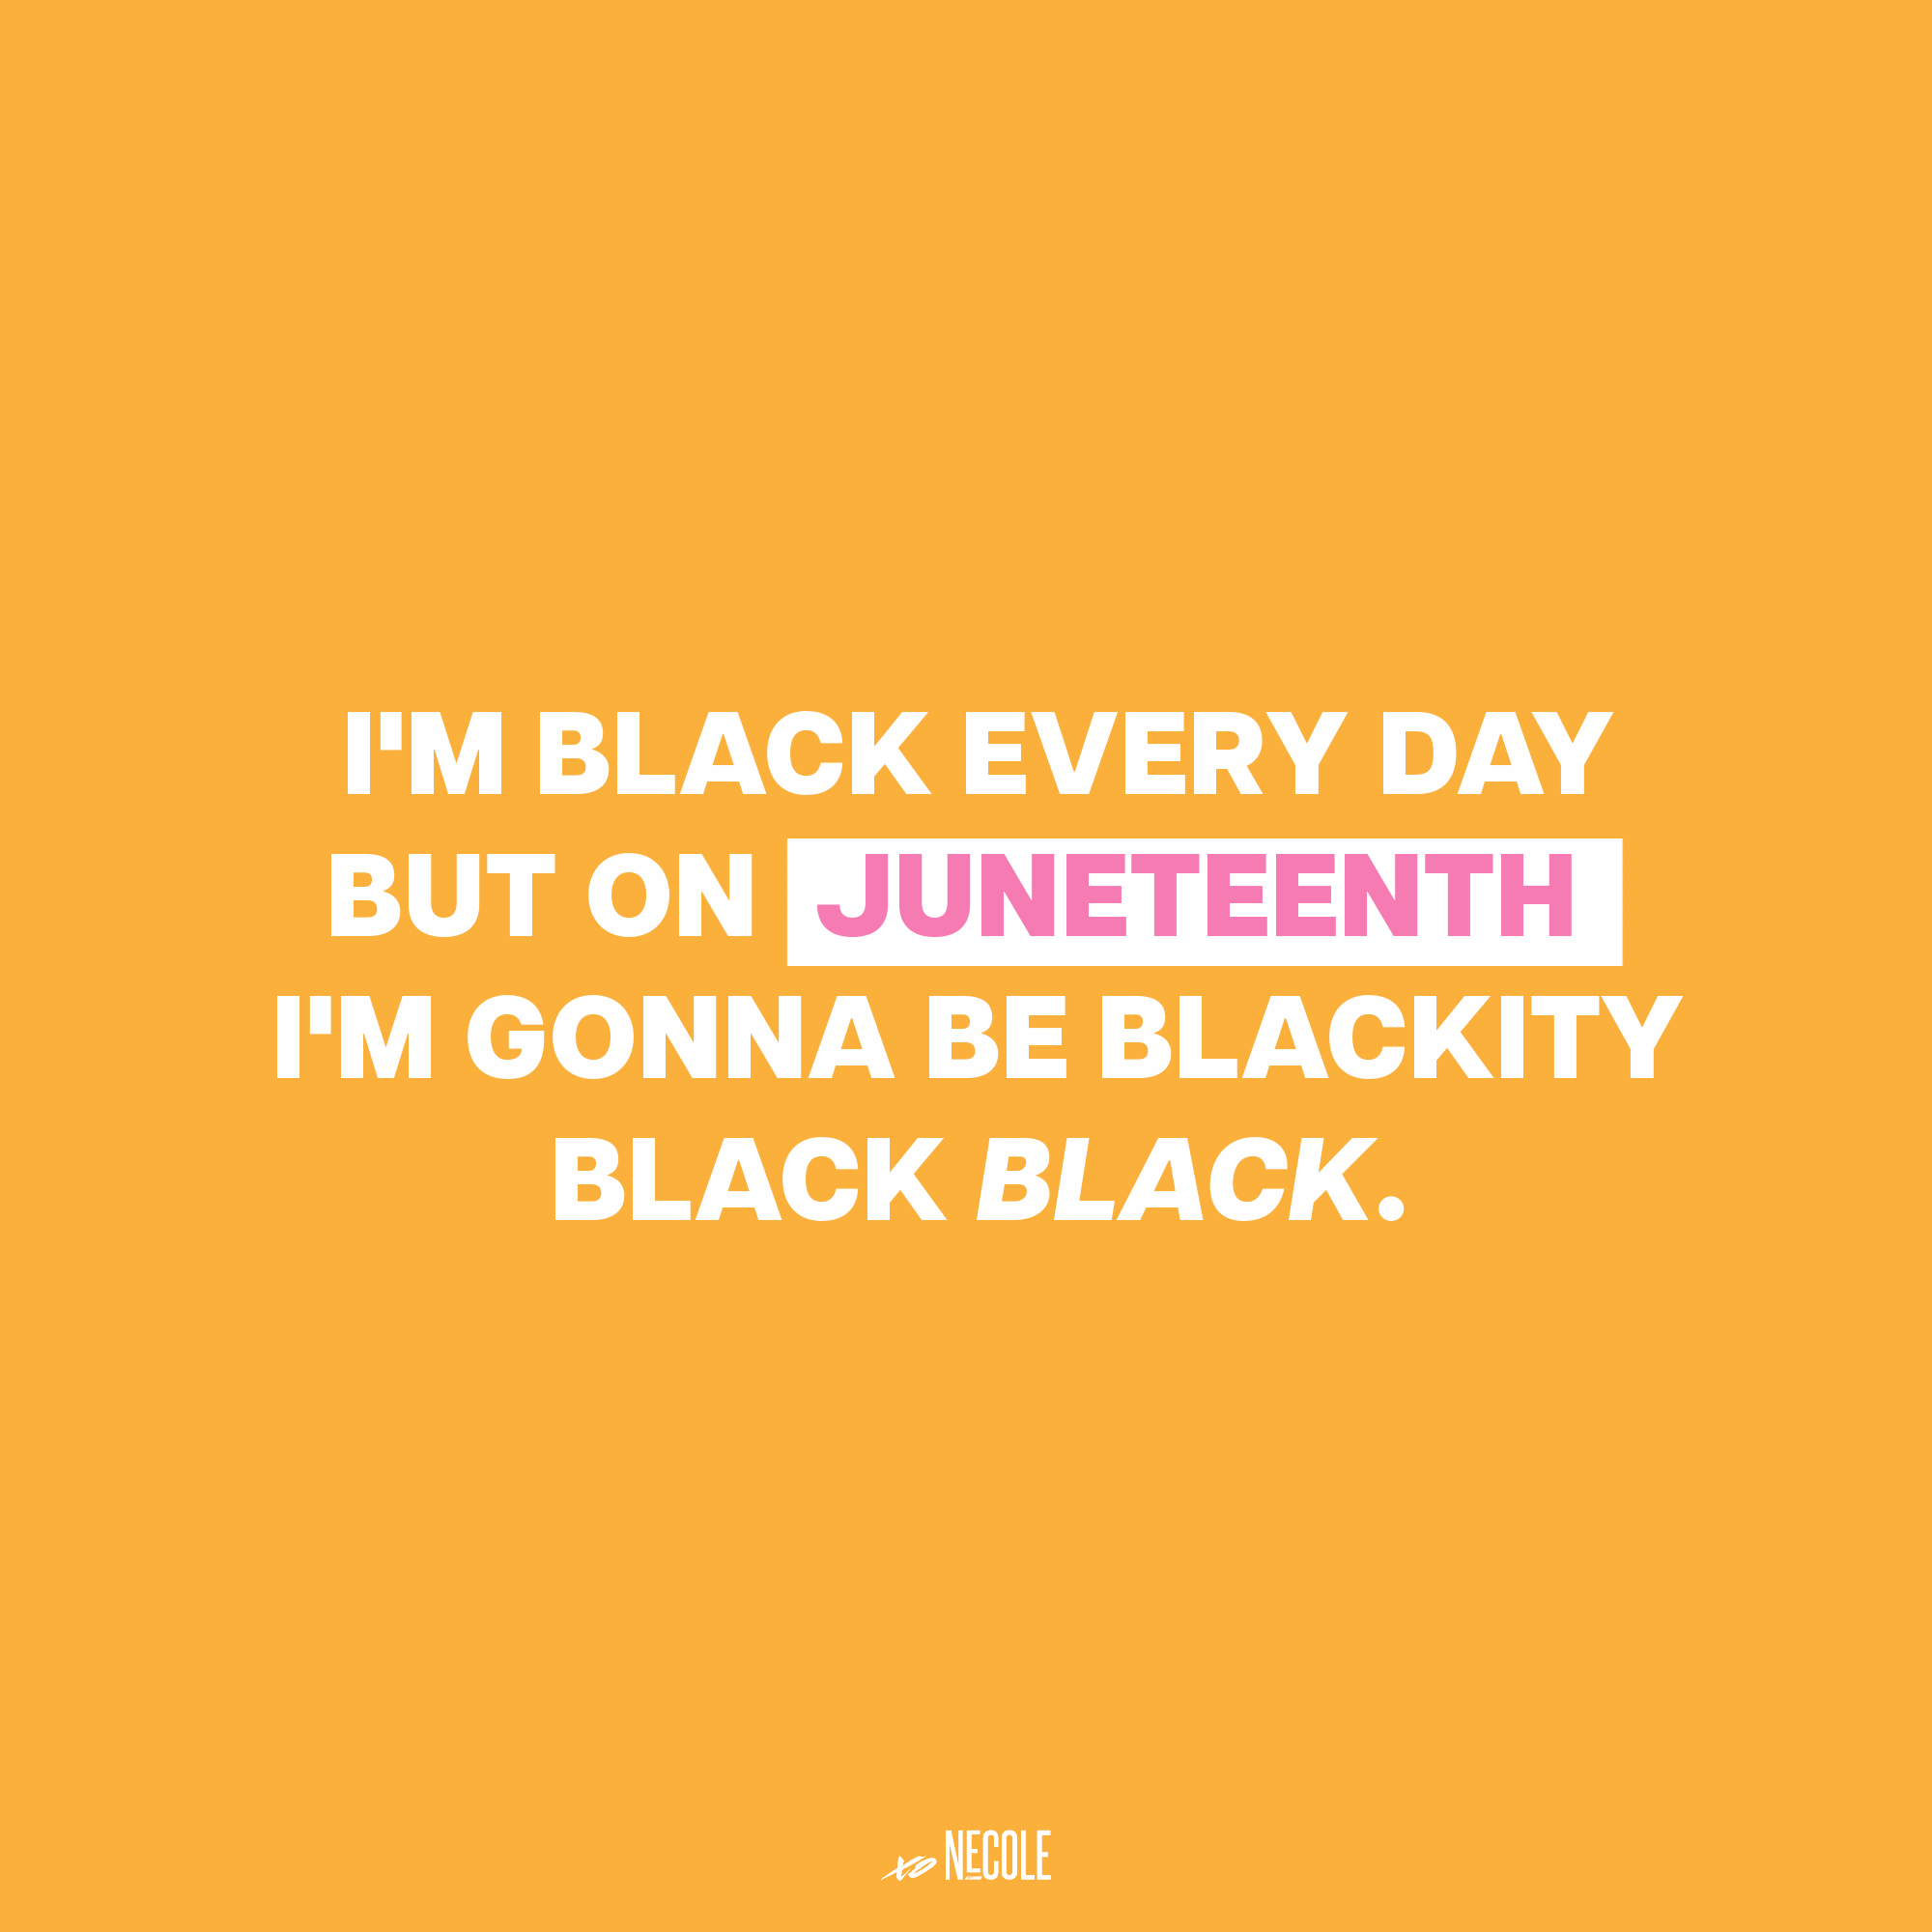 I'm black every day but on Juneteenth I'm gonna be blackity black black.